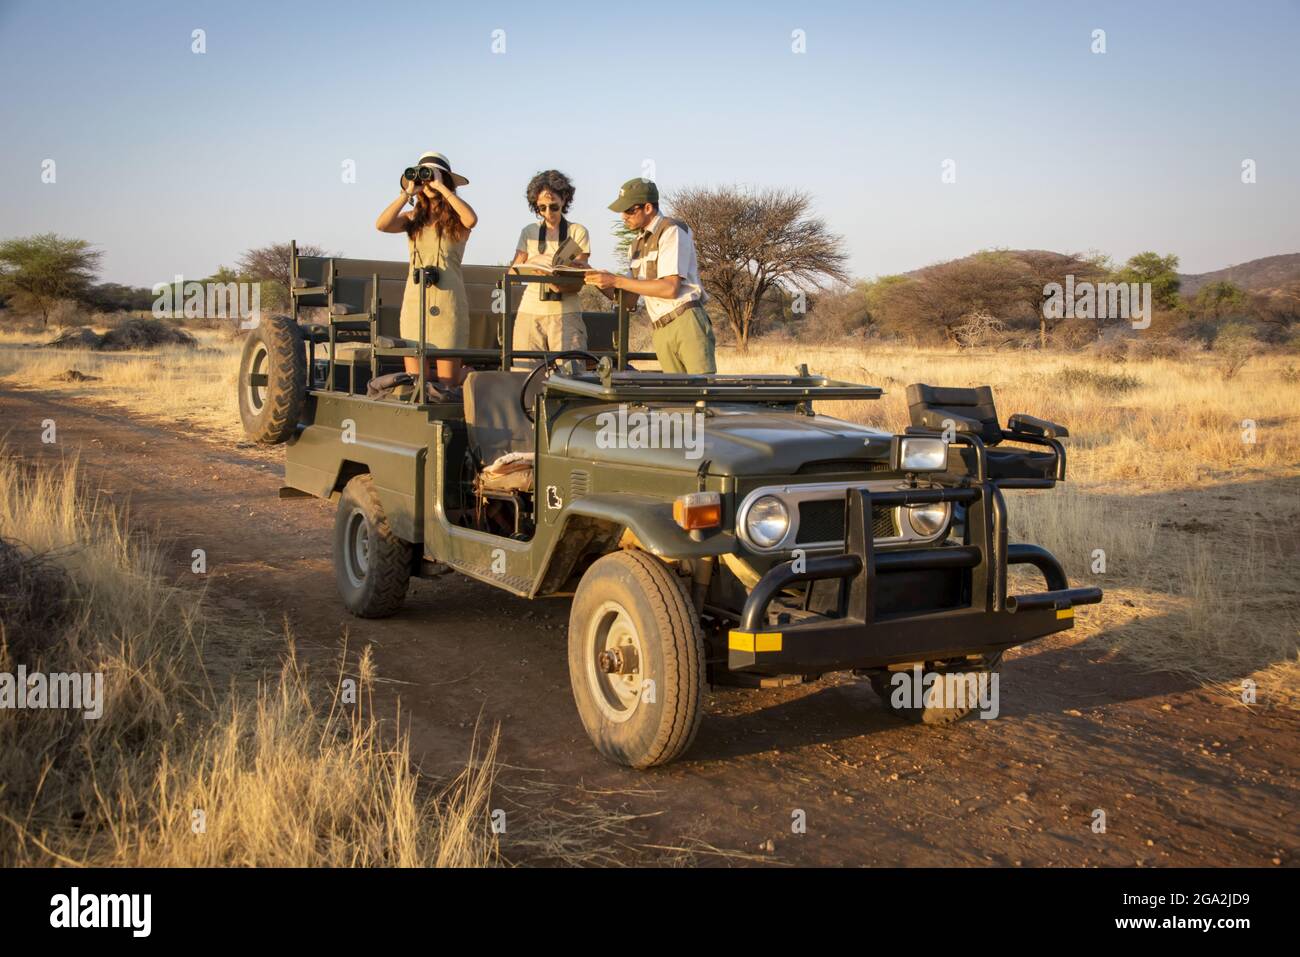 Safari guide and woman traveler standing in a parked jeep looking at reference book while another kneels in jeep looking out onto the savanna with ... Stock Photo